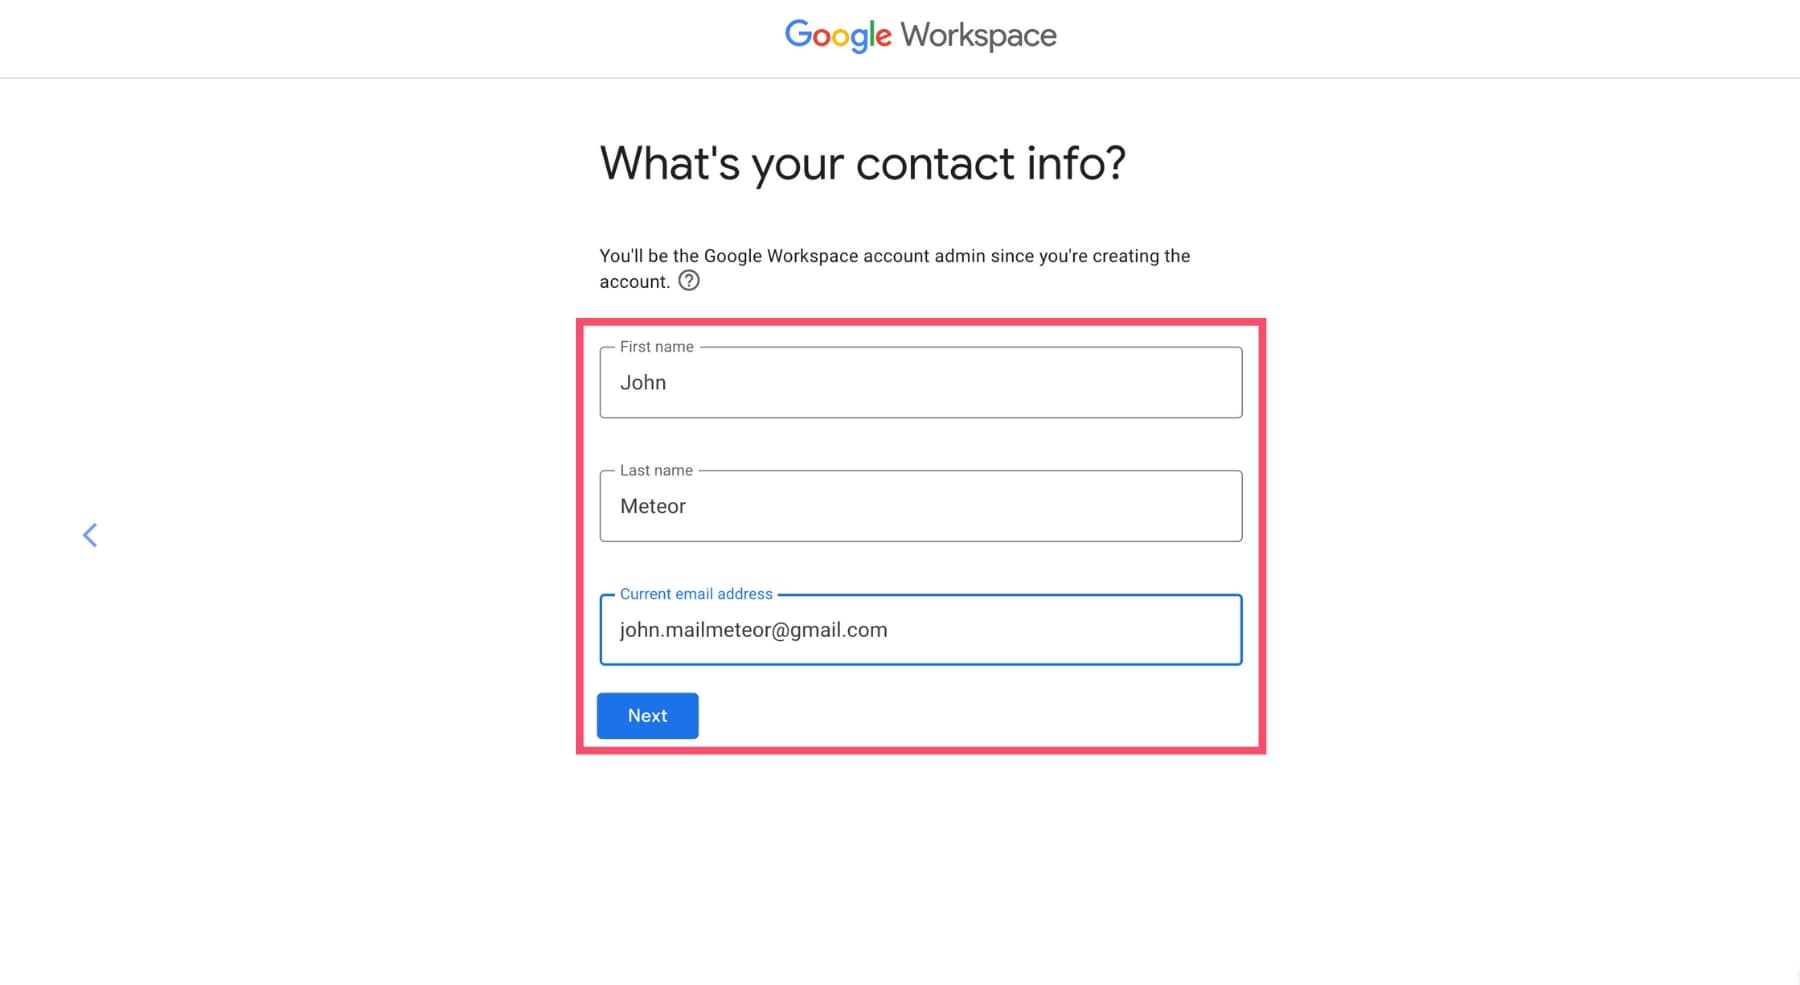 Enter the contact info of your Gmail business email account